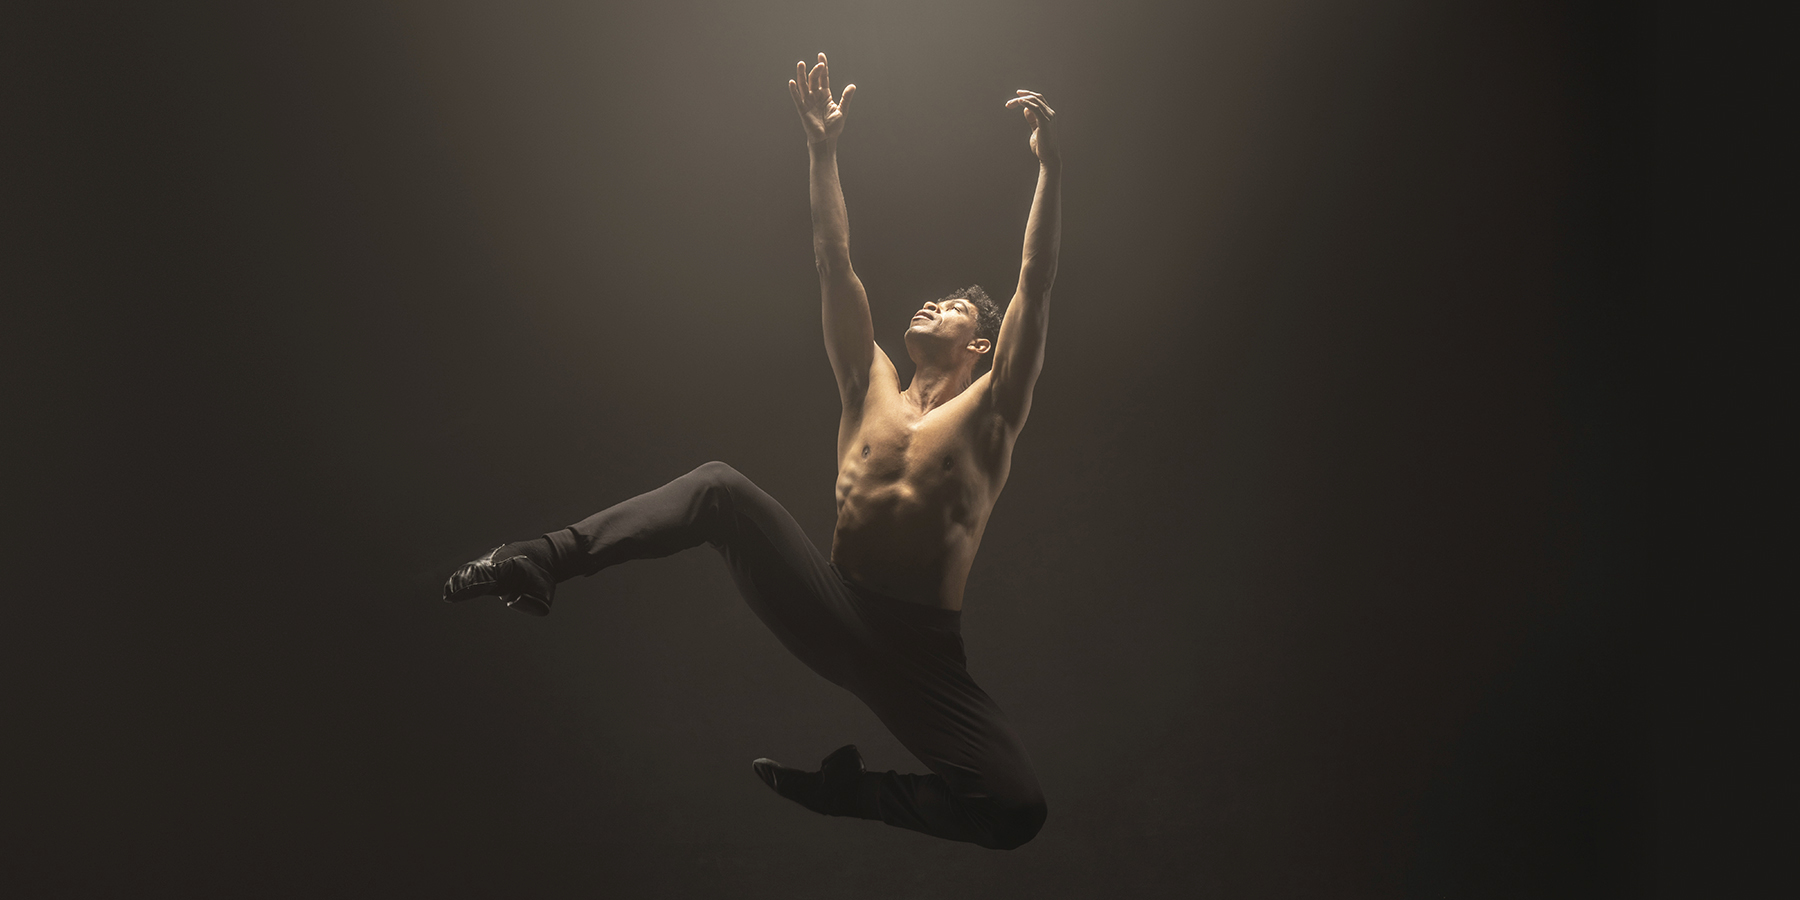 Carlos Acosta is suspended mid-air in a jump, reaching toward the sky with his legs bent